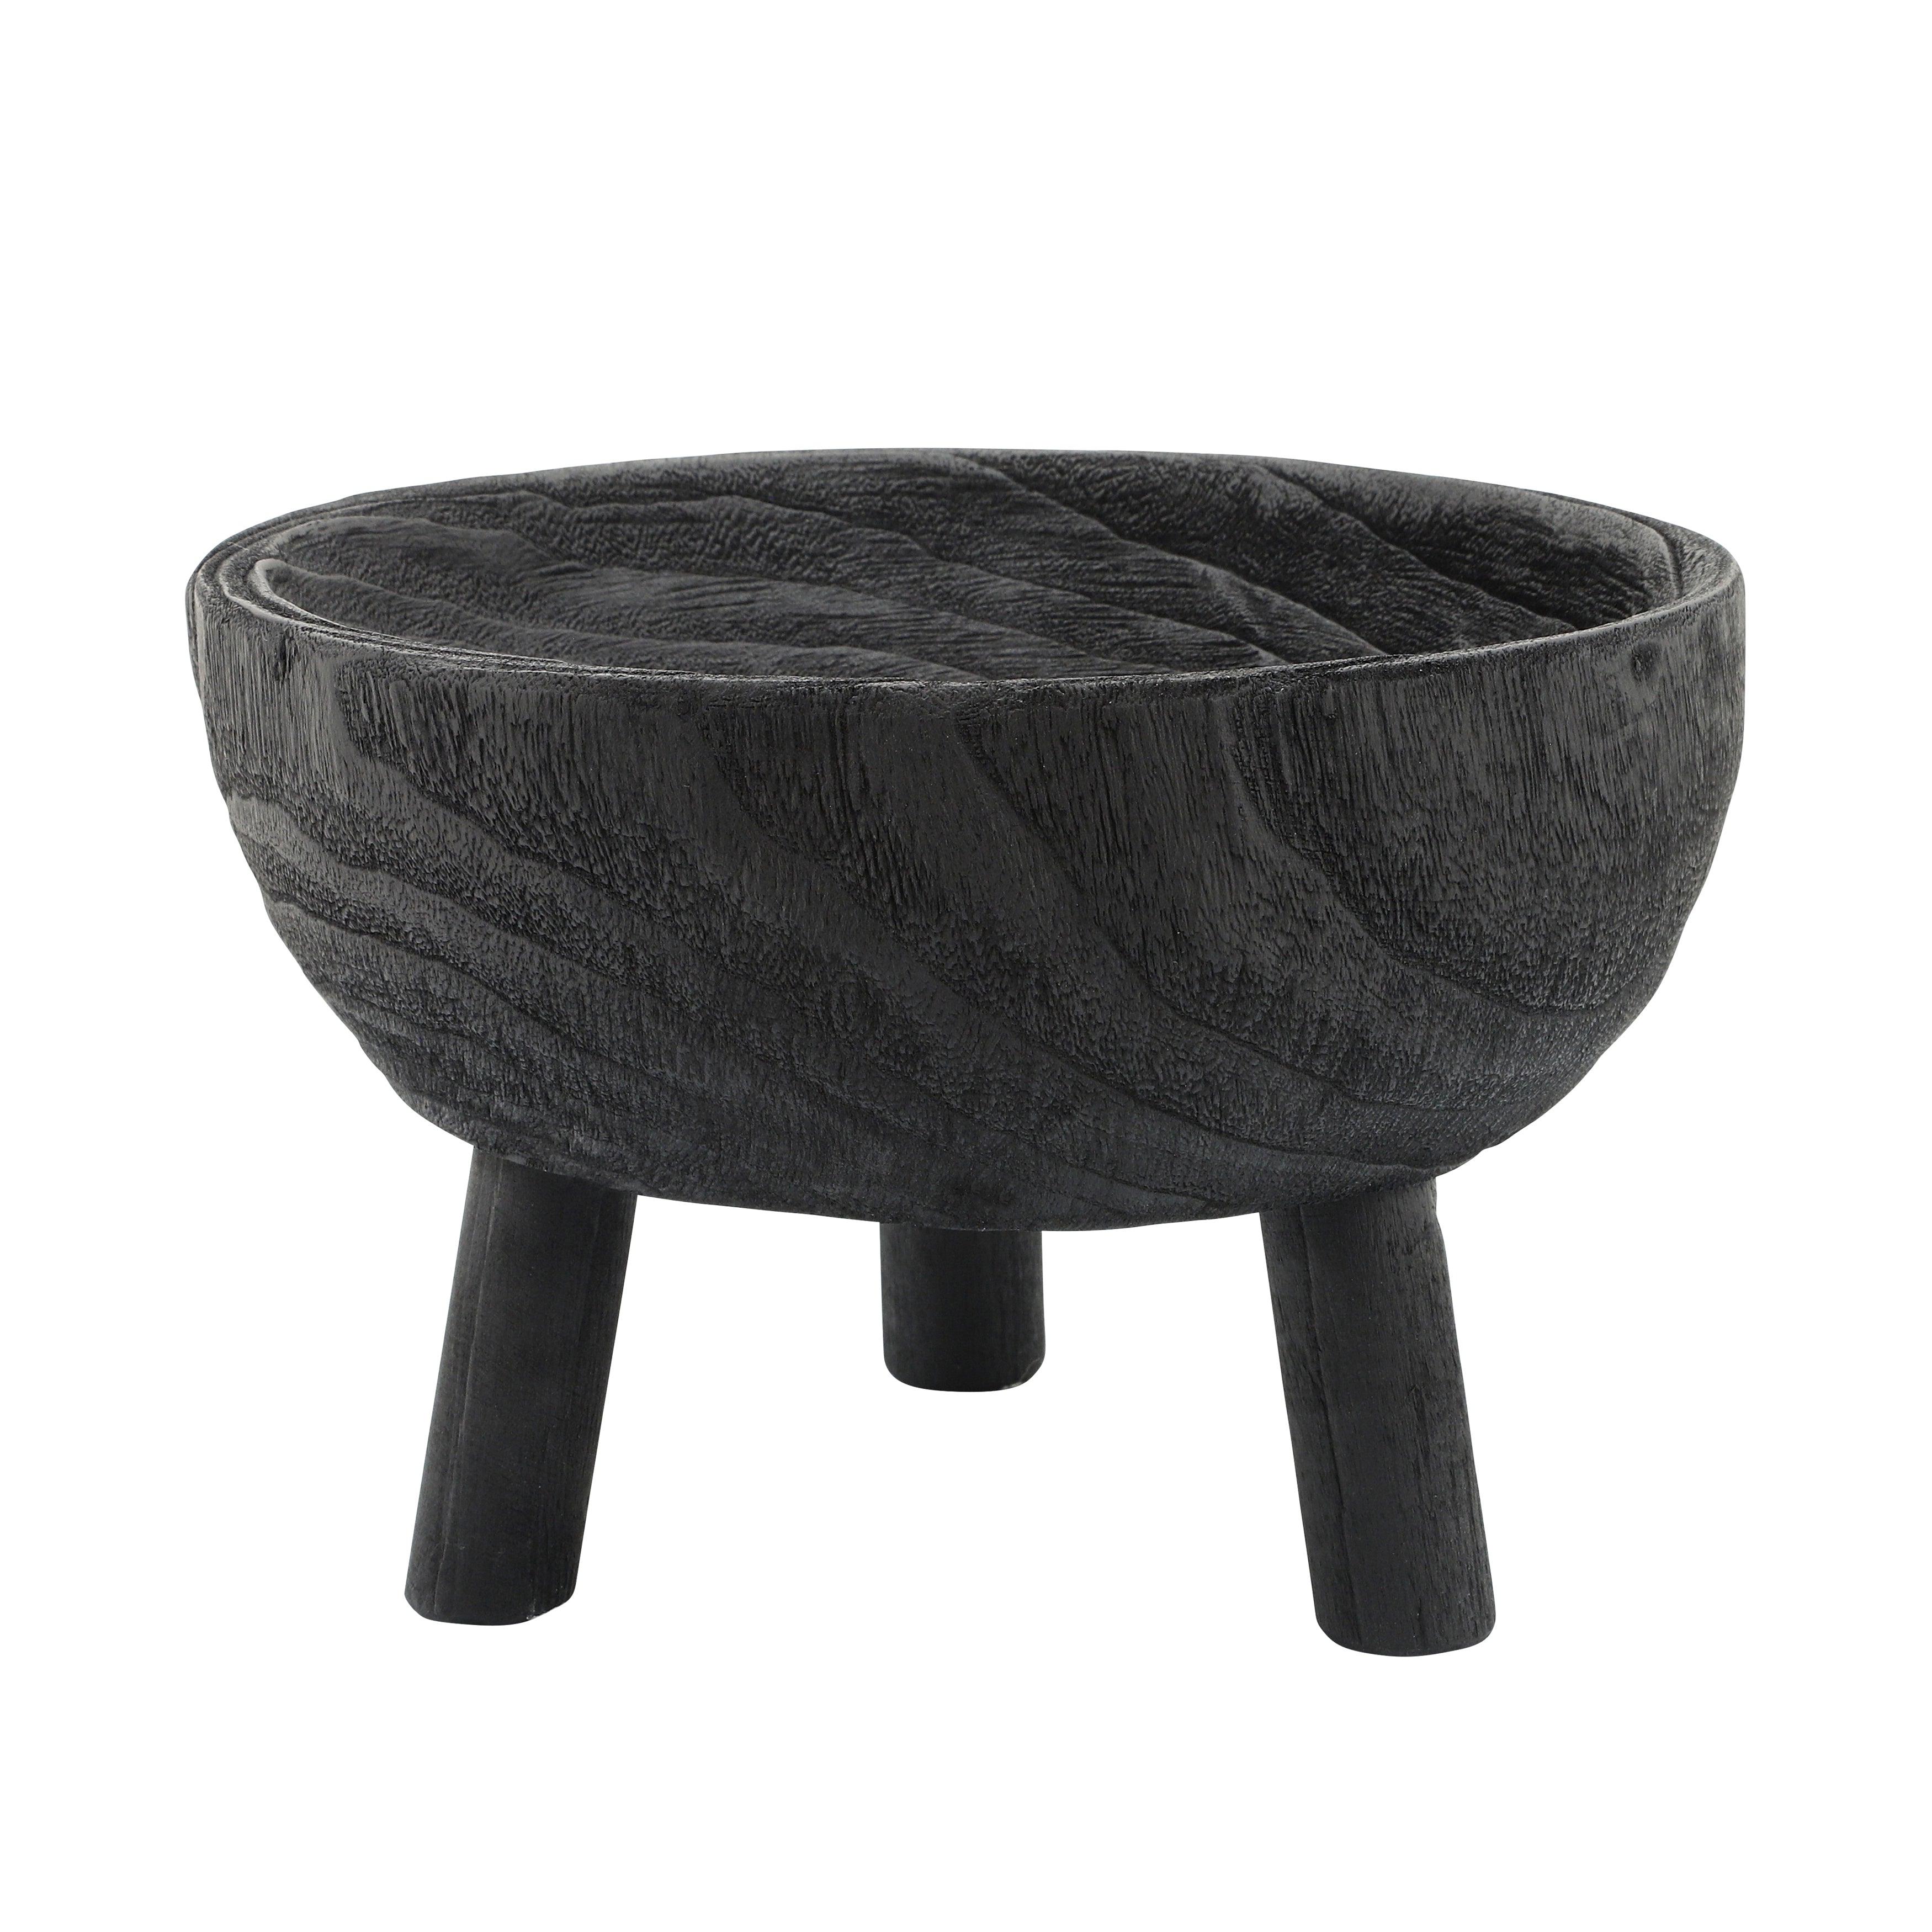 Wood Bowl With Legs - Black